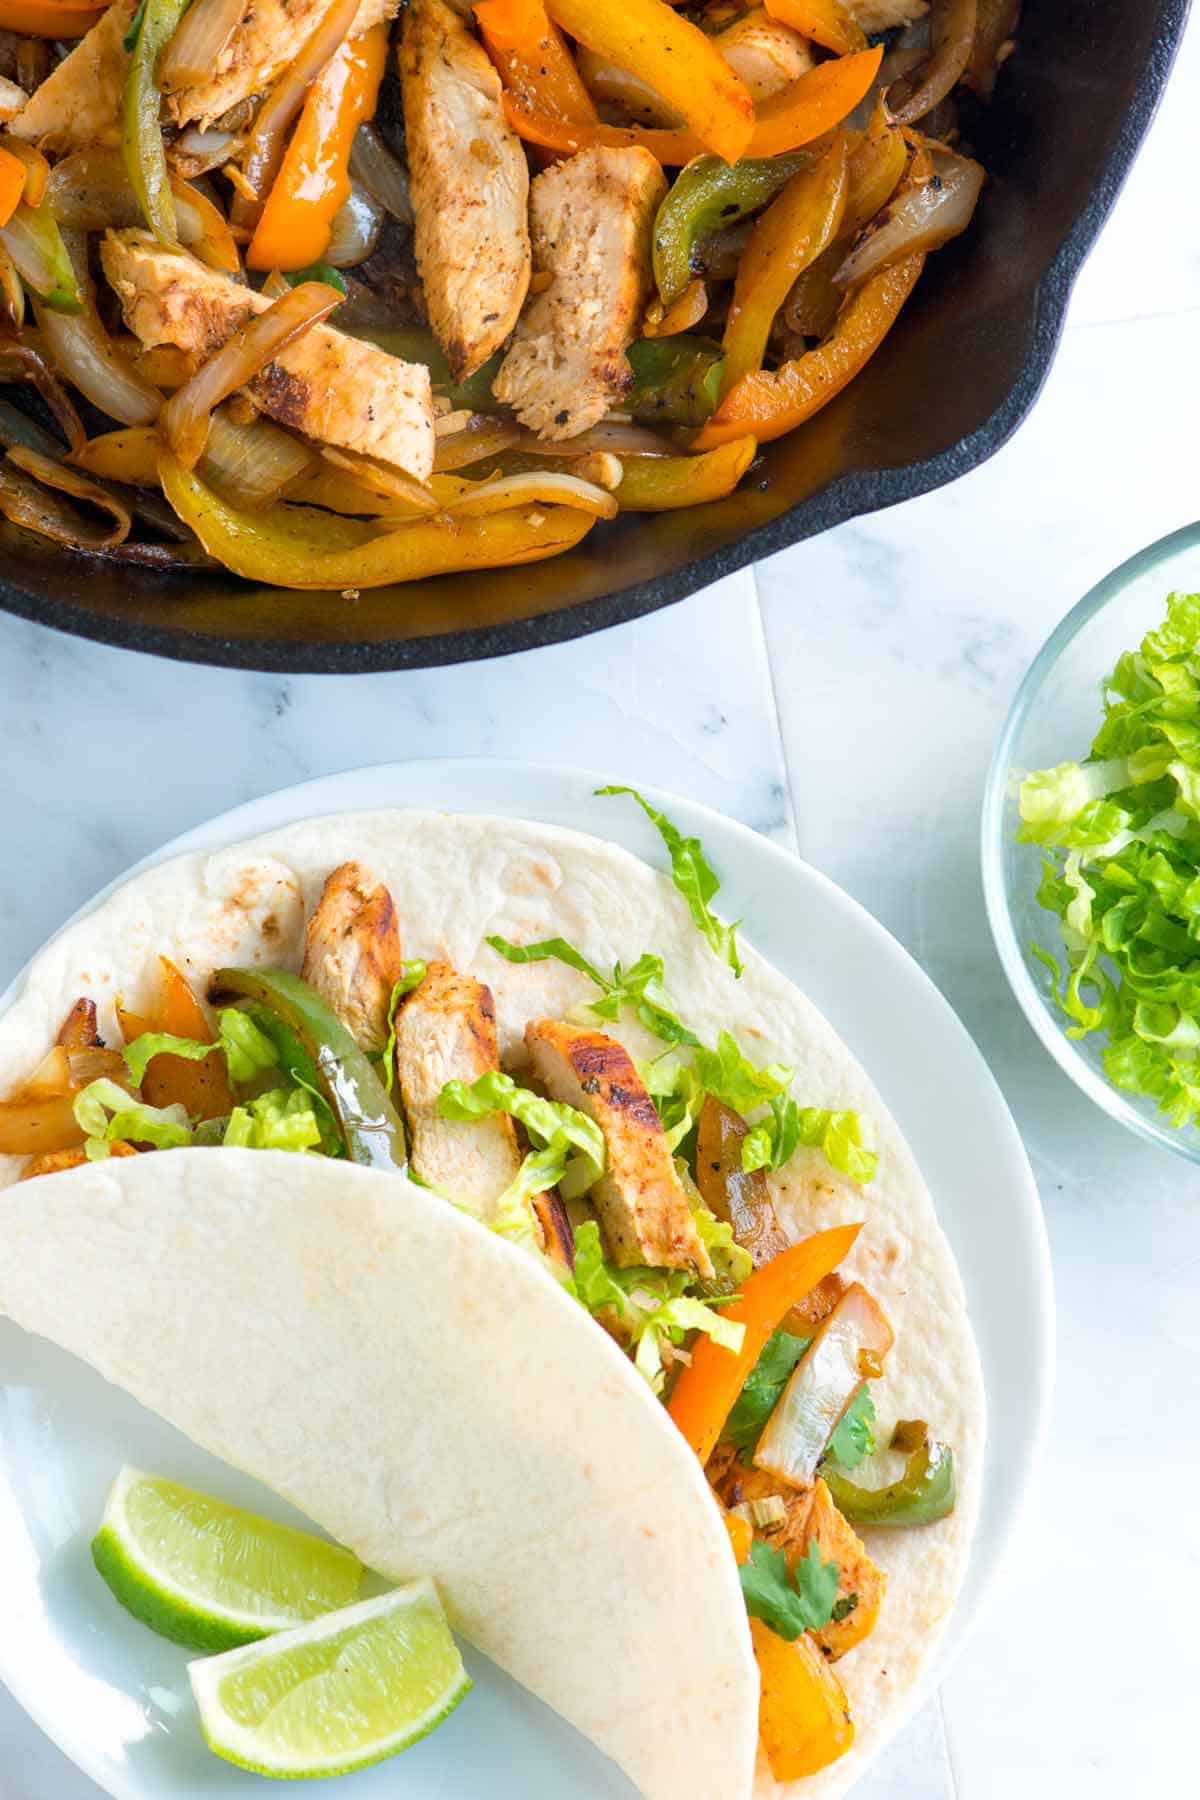 Skillet of chicken fajitas with tortillas, lettuce and limes